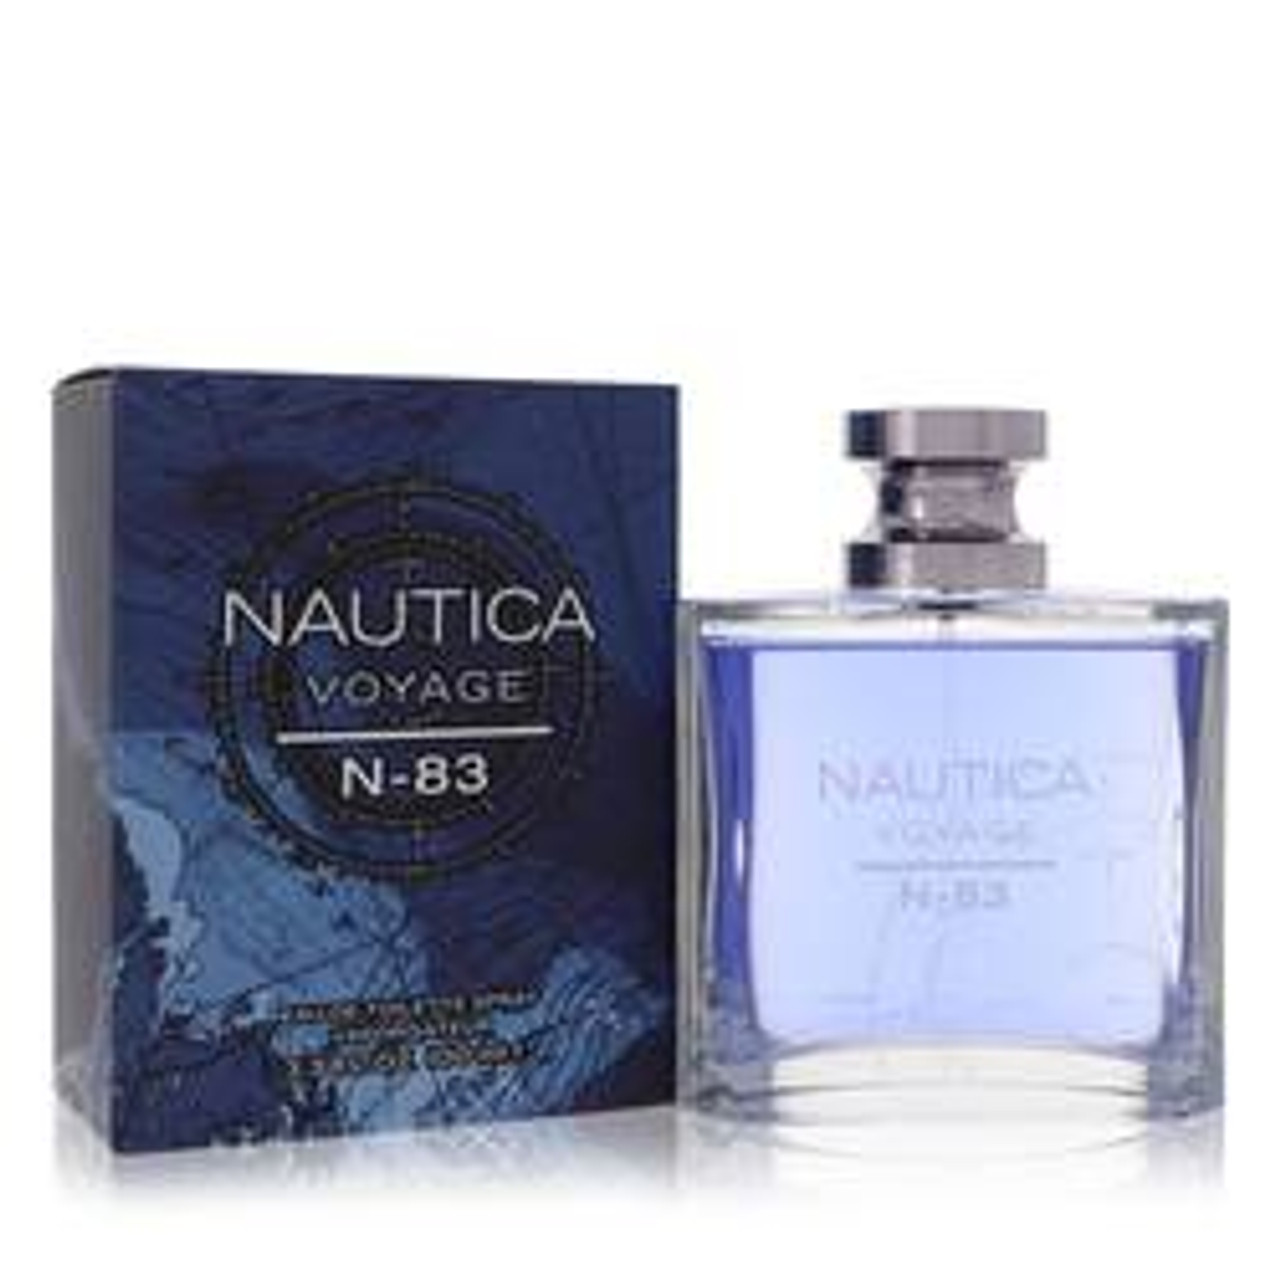 Nautica Voyage N-83 Cologne By Nautica Eau De Toilette Spray 3.4 oz for Men - [From 55.00 - Choose pk Qty ] - *Ships from Miami